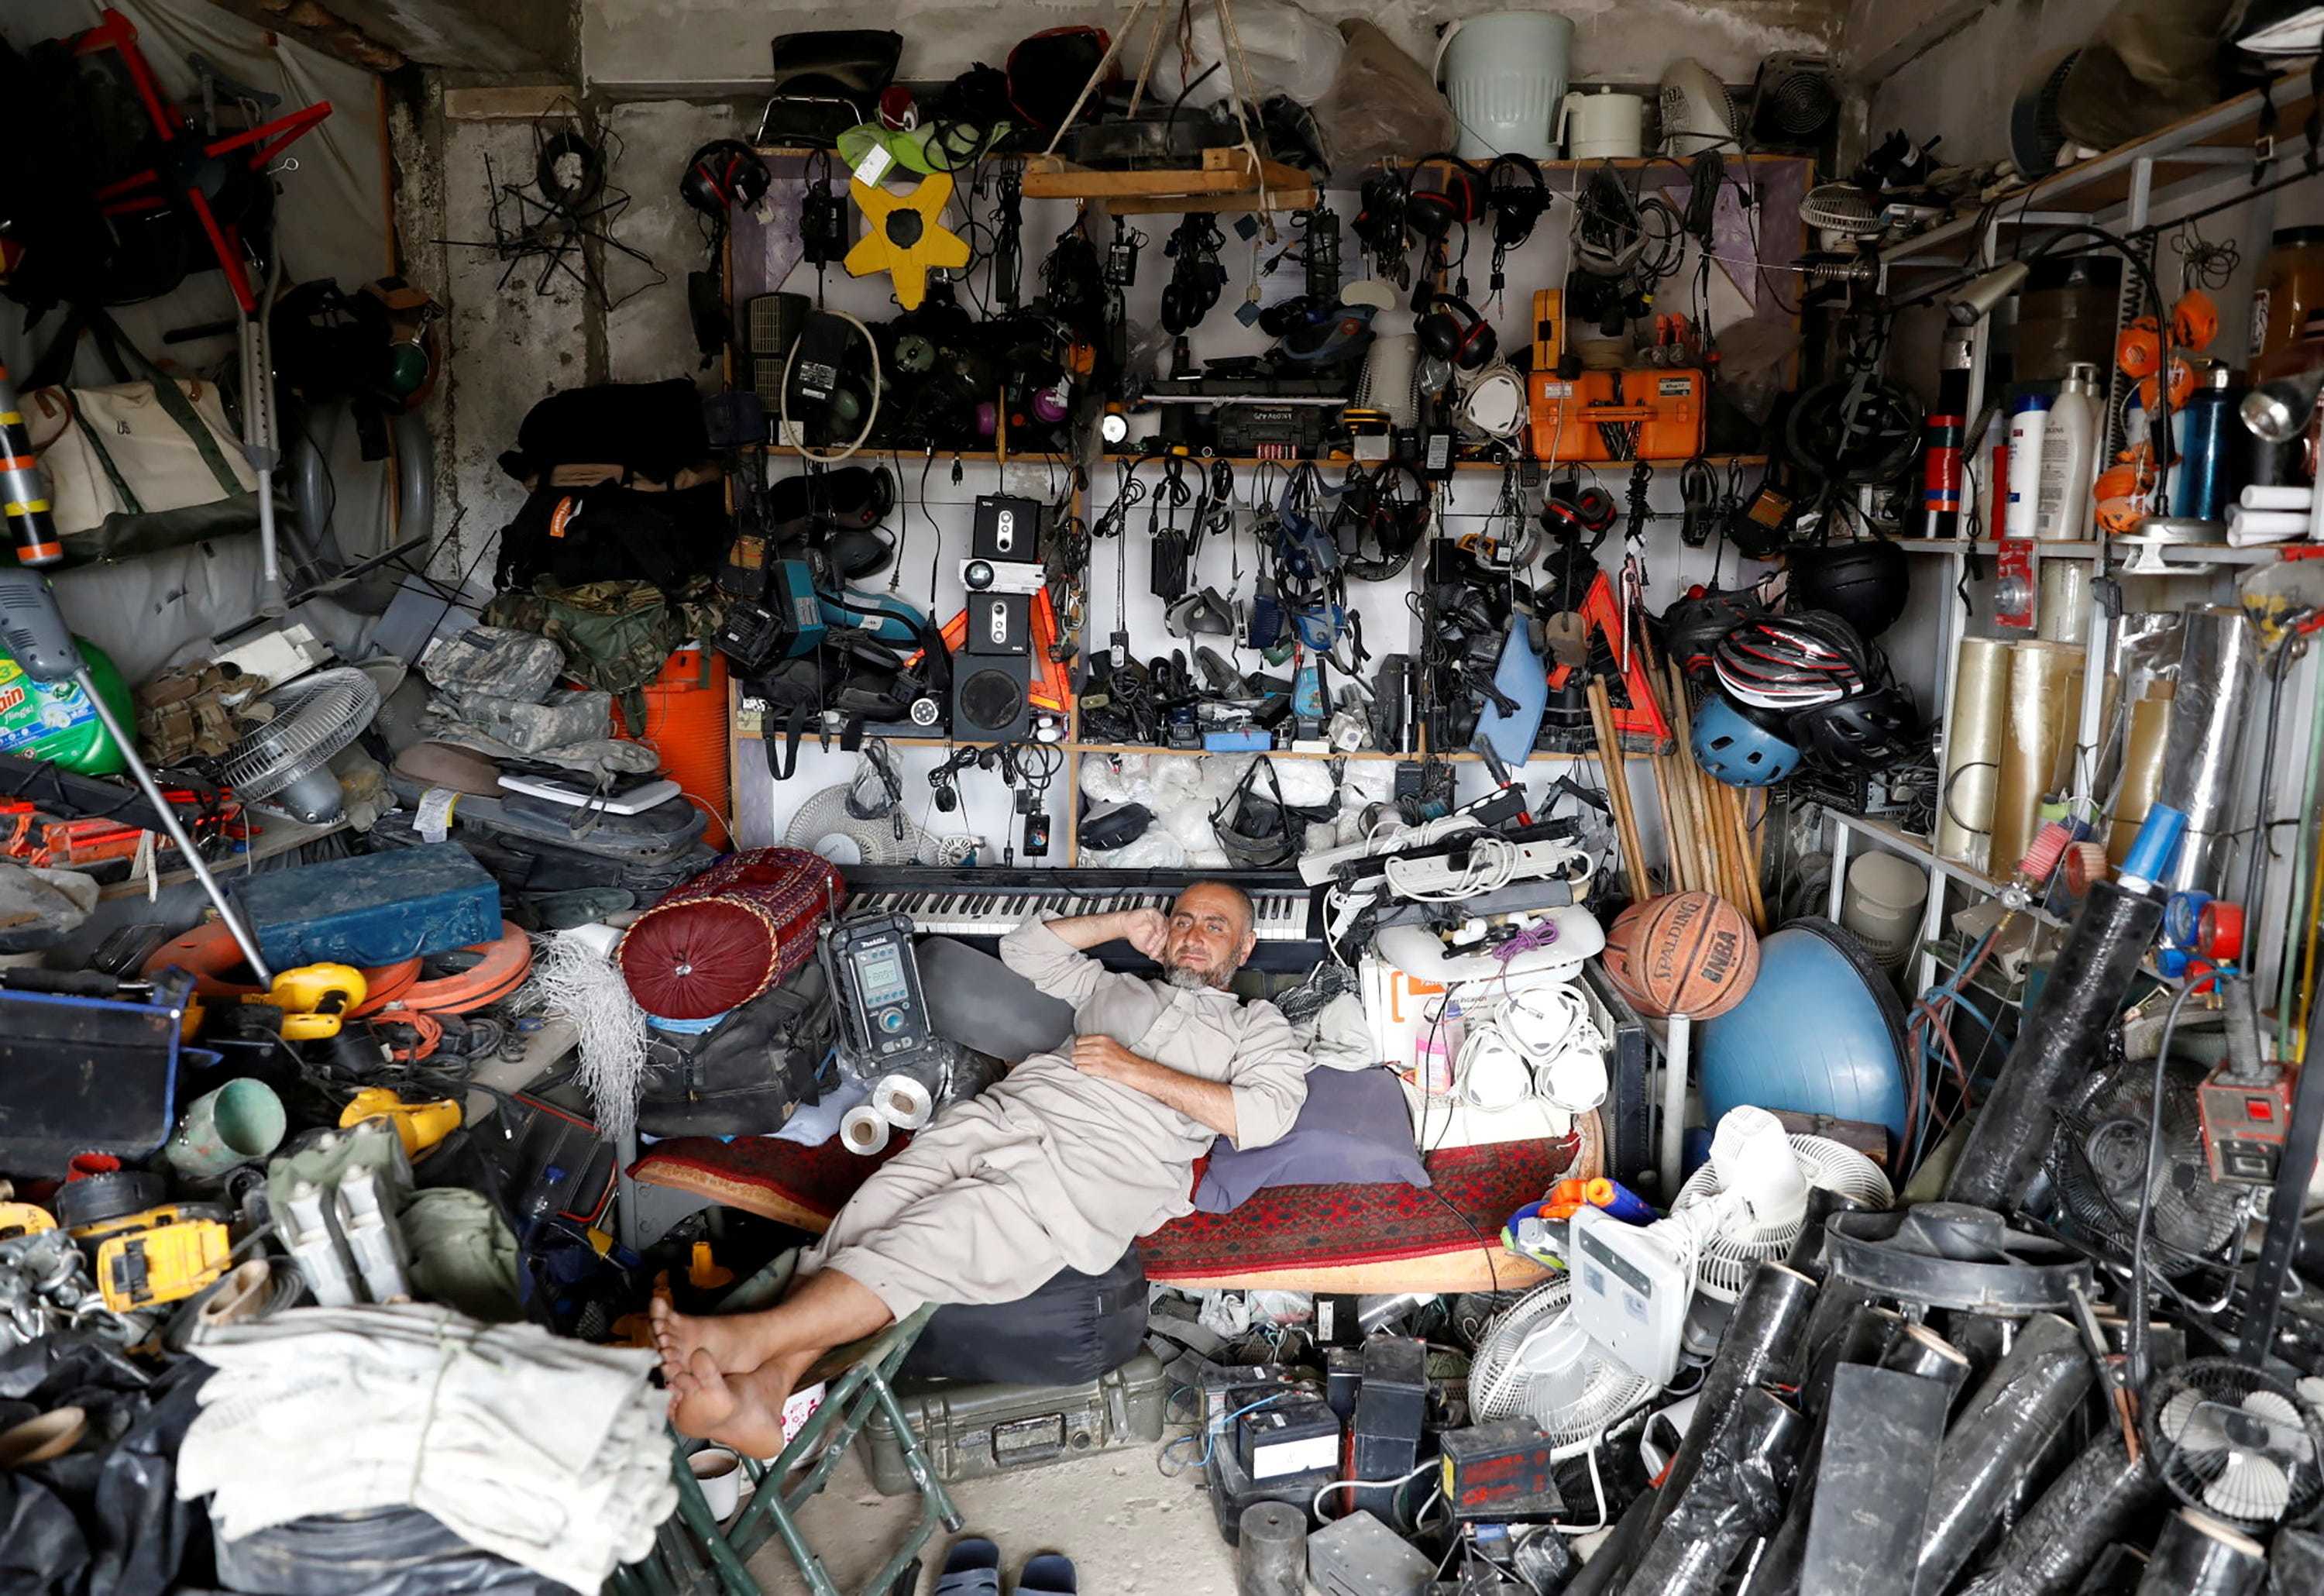 An Afghan man rests on a couch in his shop surrounded by items on the floor and the walls.